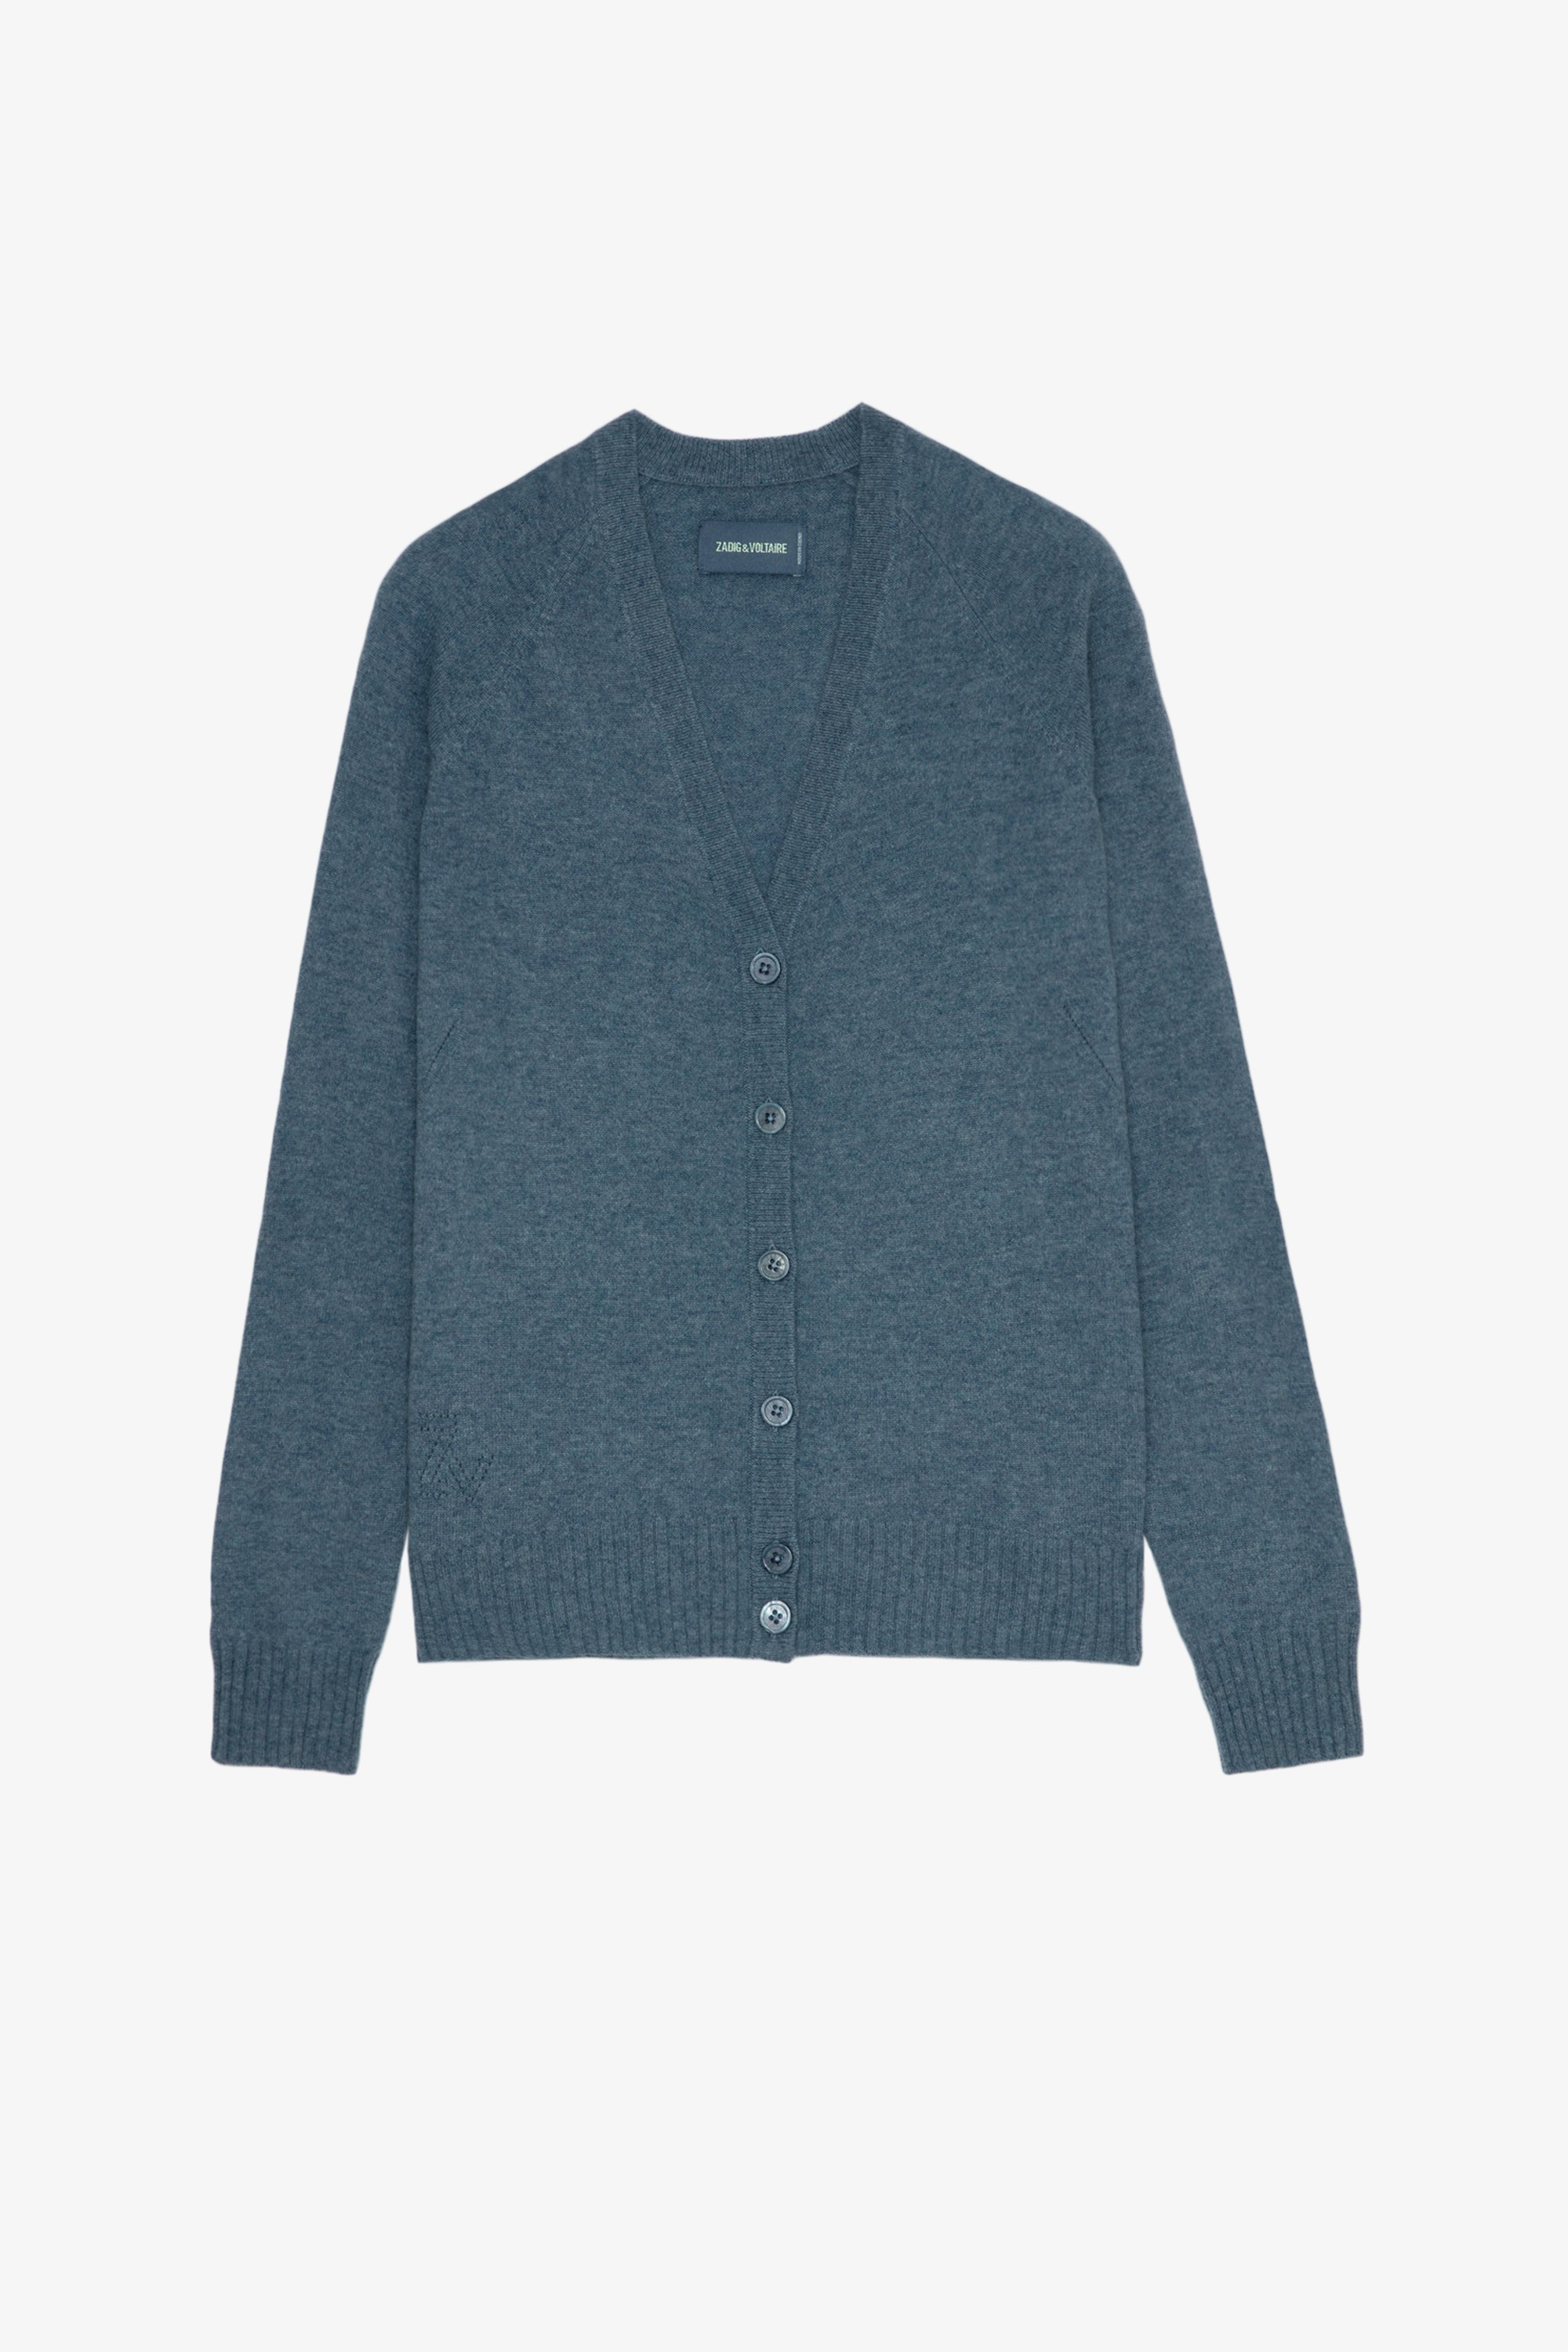 Jim Patch Cashmere Cardigan Women’s blue cashmere cardigan with star patches on the sleeves.